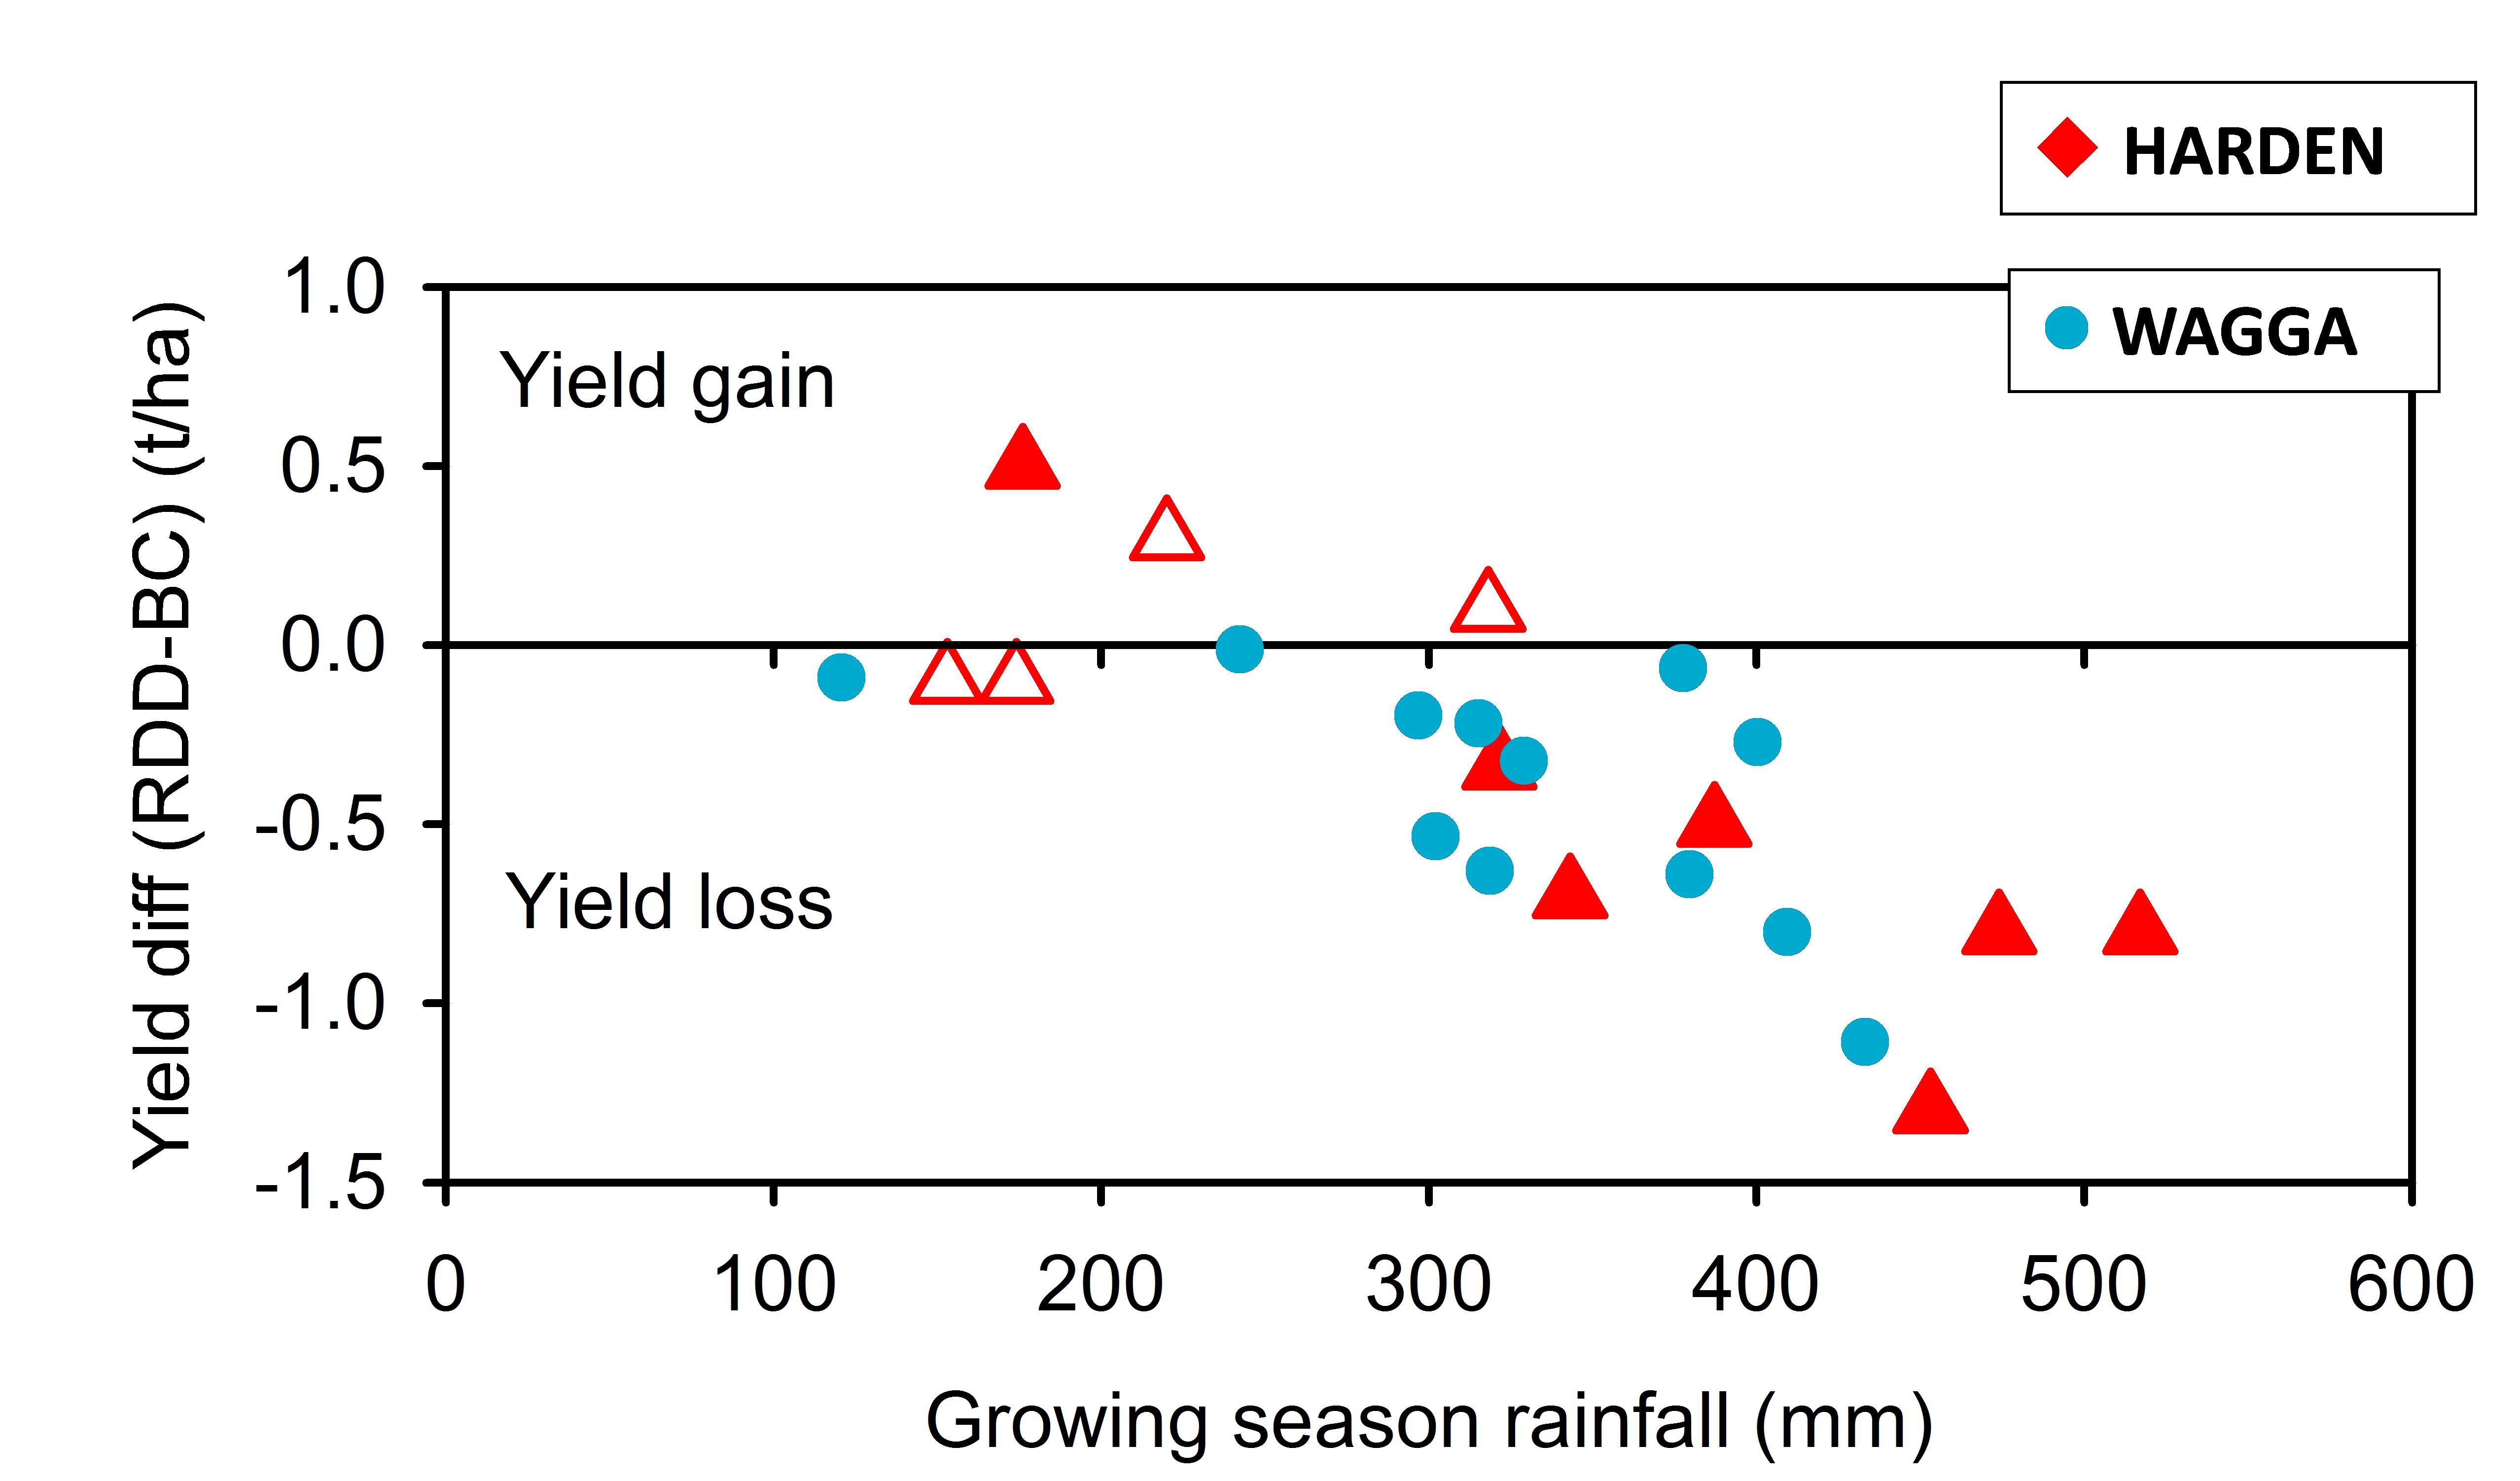 Figure 1: The relationship between growing season rainfall and the yield difference between stubble retained direct drill (RDD) treatments vs. burn and cultivate (BC) treatments form long term sites at Wagga (NSW DPI) and Harden (CSIRO). Figure courtesy of John Kirkegaard, CSIRO.